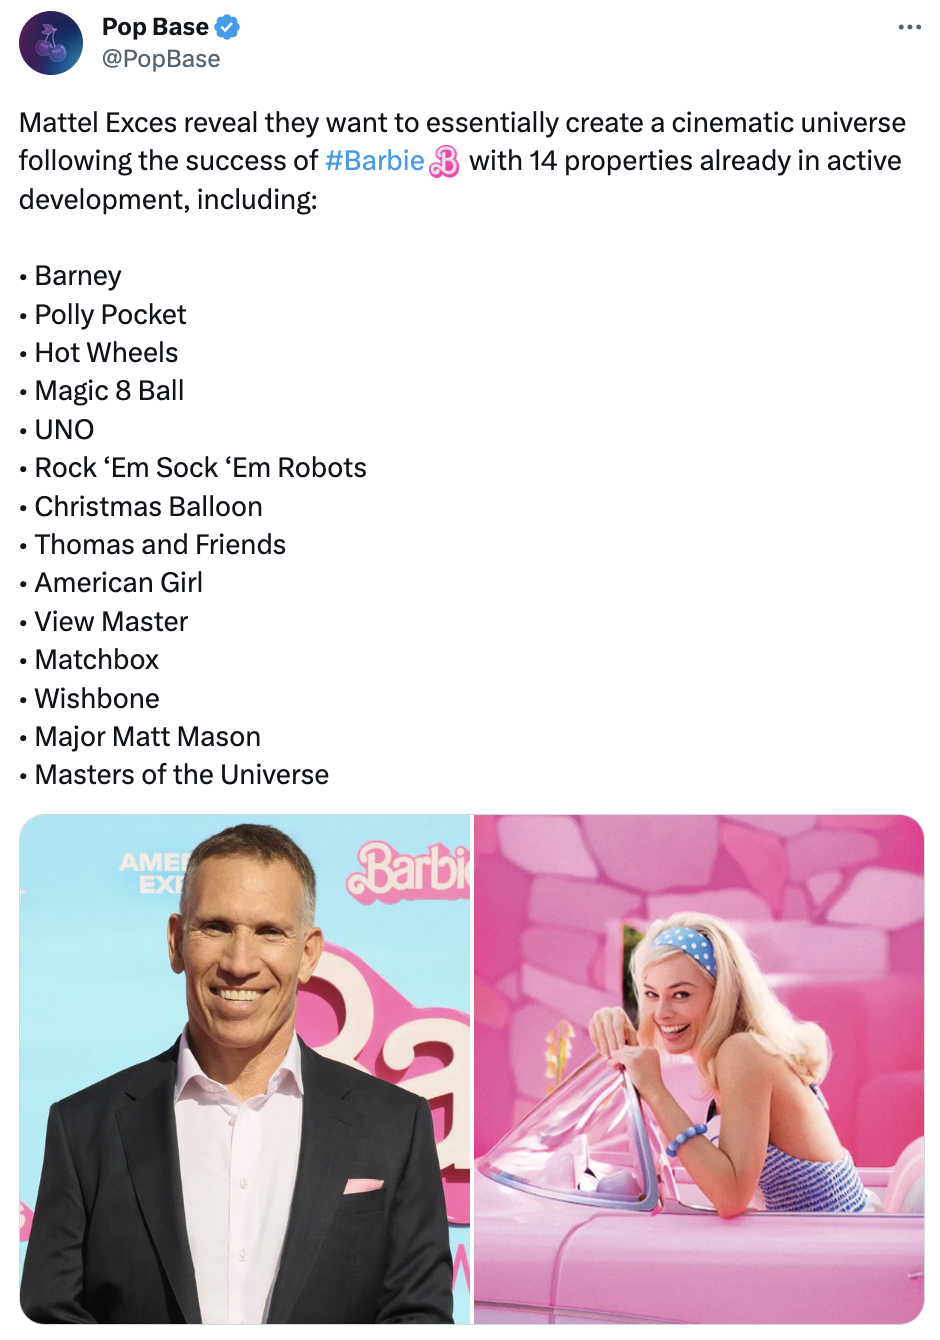 Mattel Cinematic Universe  - media - Pop Base PopBase Mattel Exces reveal they want to essentially create a cinematic universe ing the success of with 14 properties already in active development, including . Barney Polly Pocket Hot Wheels Magic 8 Ball Uno